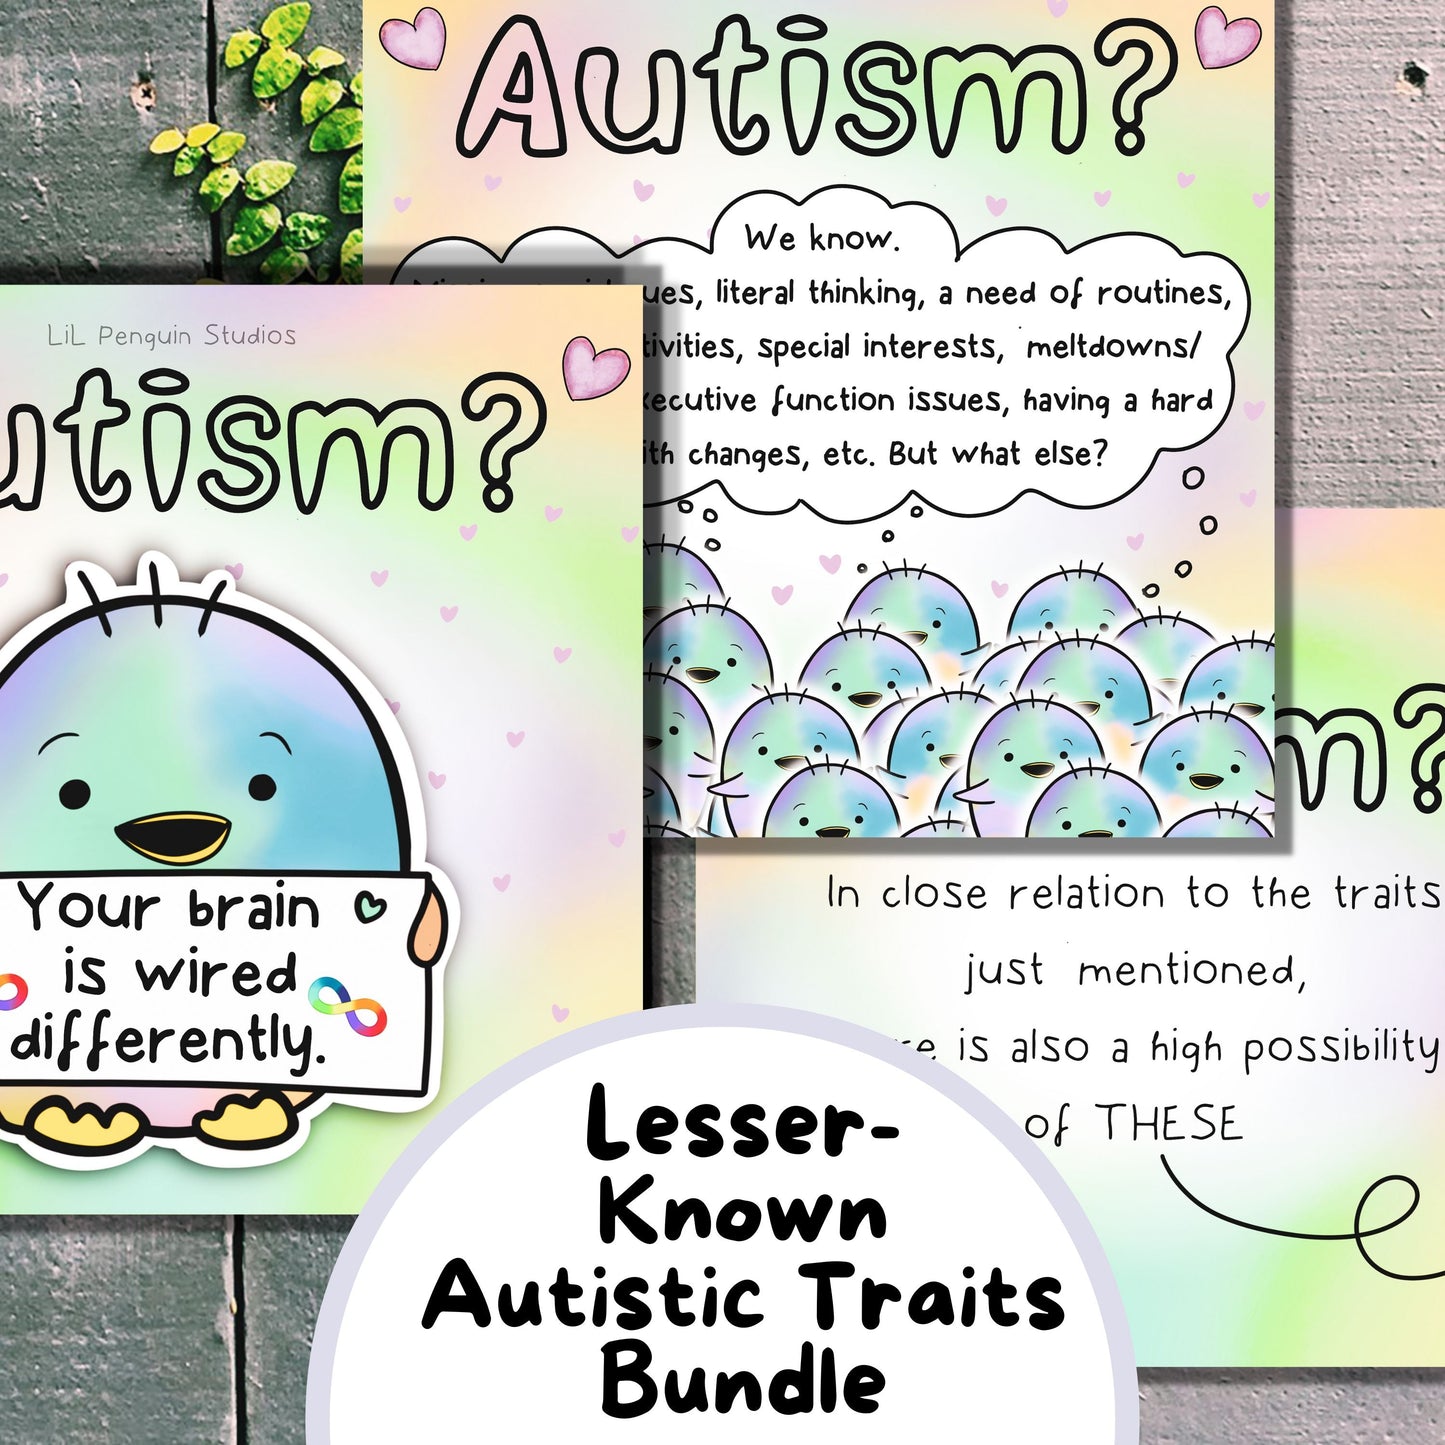 'Positives of Autism' DIGITAL Bundle with a Worksheet - Personal Use